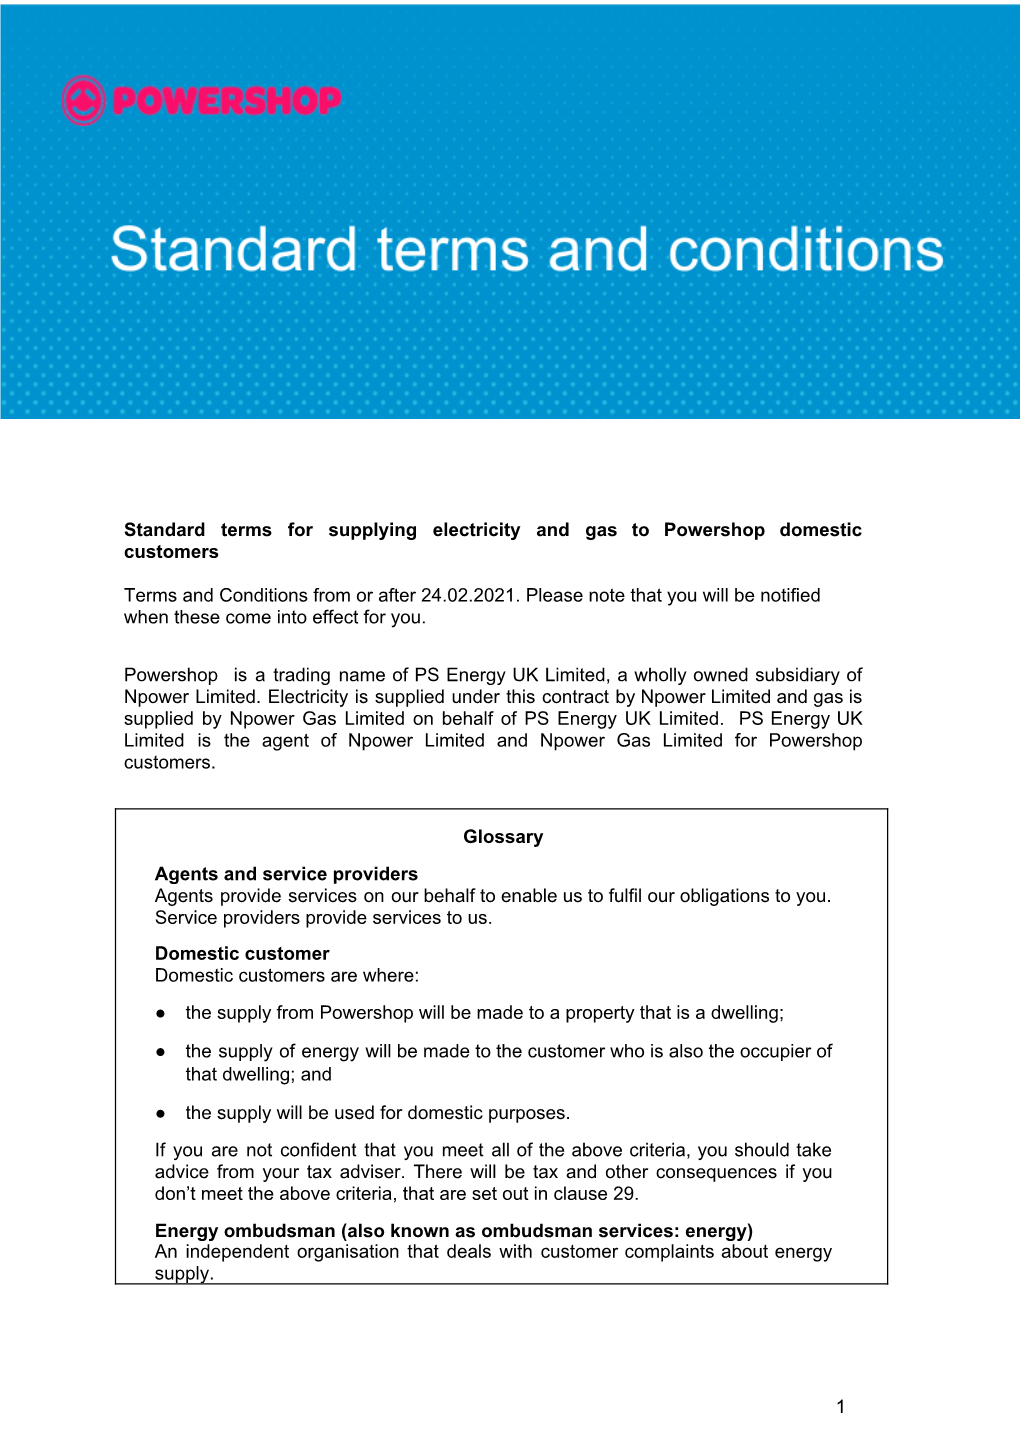 Standard Terms for Supplying Electricity and Gas to Powershop Domestic Customers